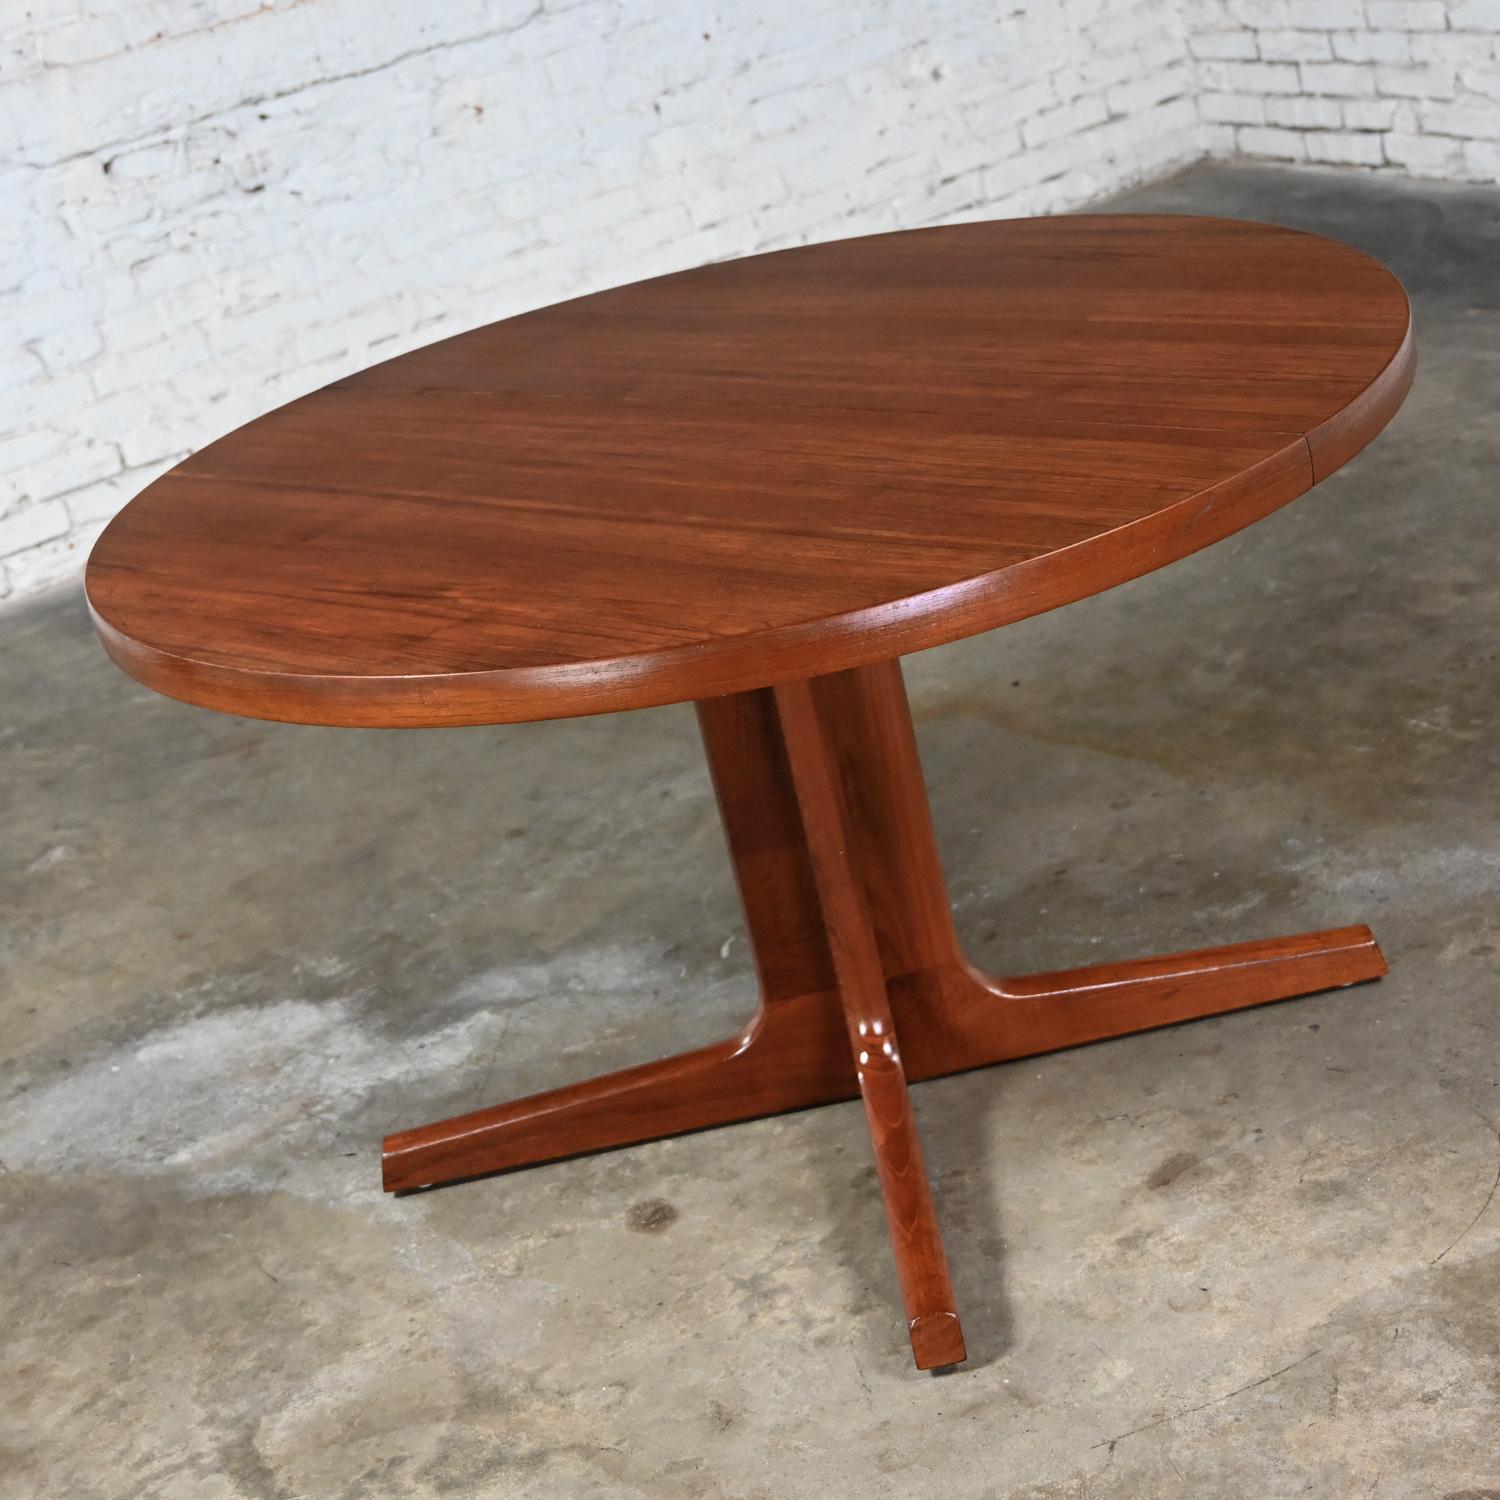 20th Century Scandinavian Modern Teak Round - Oval Extension Dining Table Pedestal Base by AM